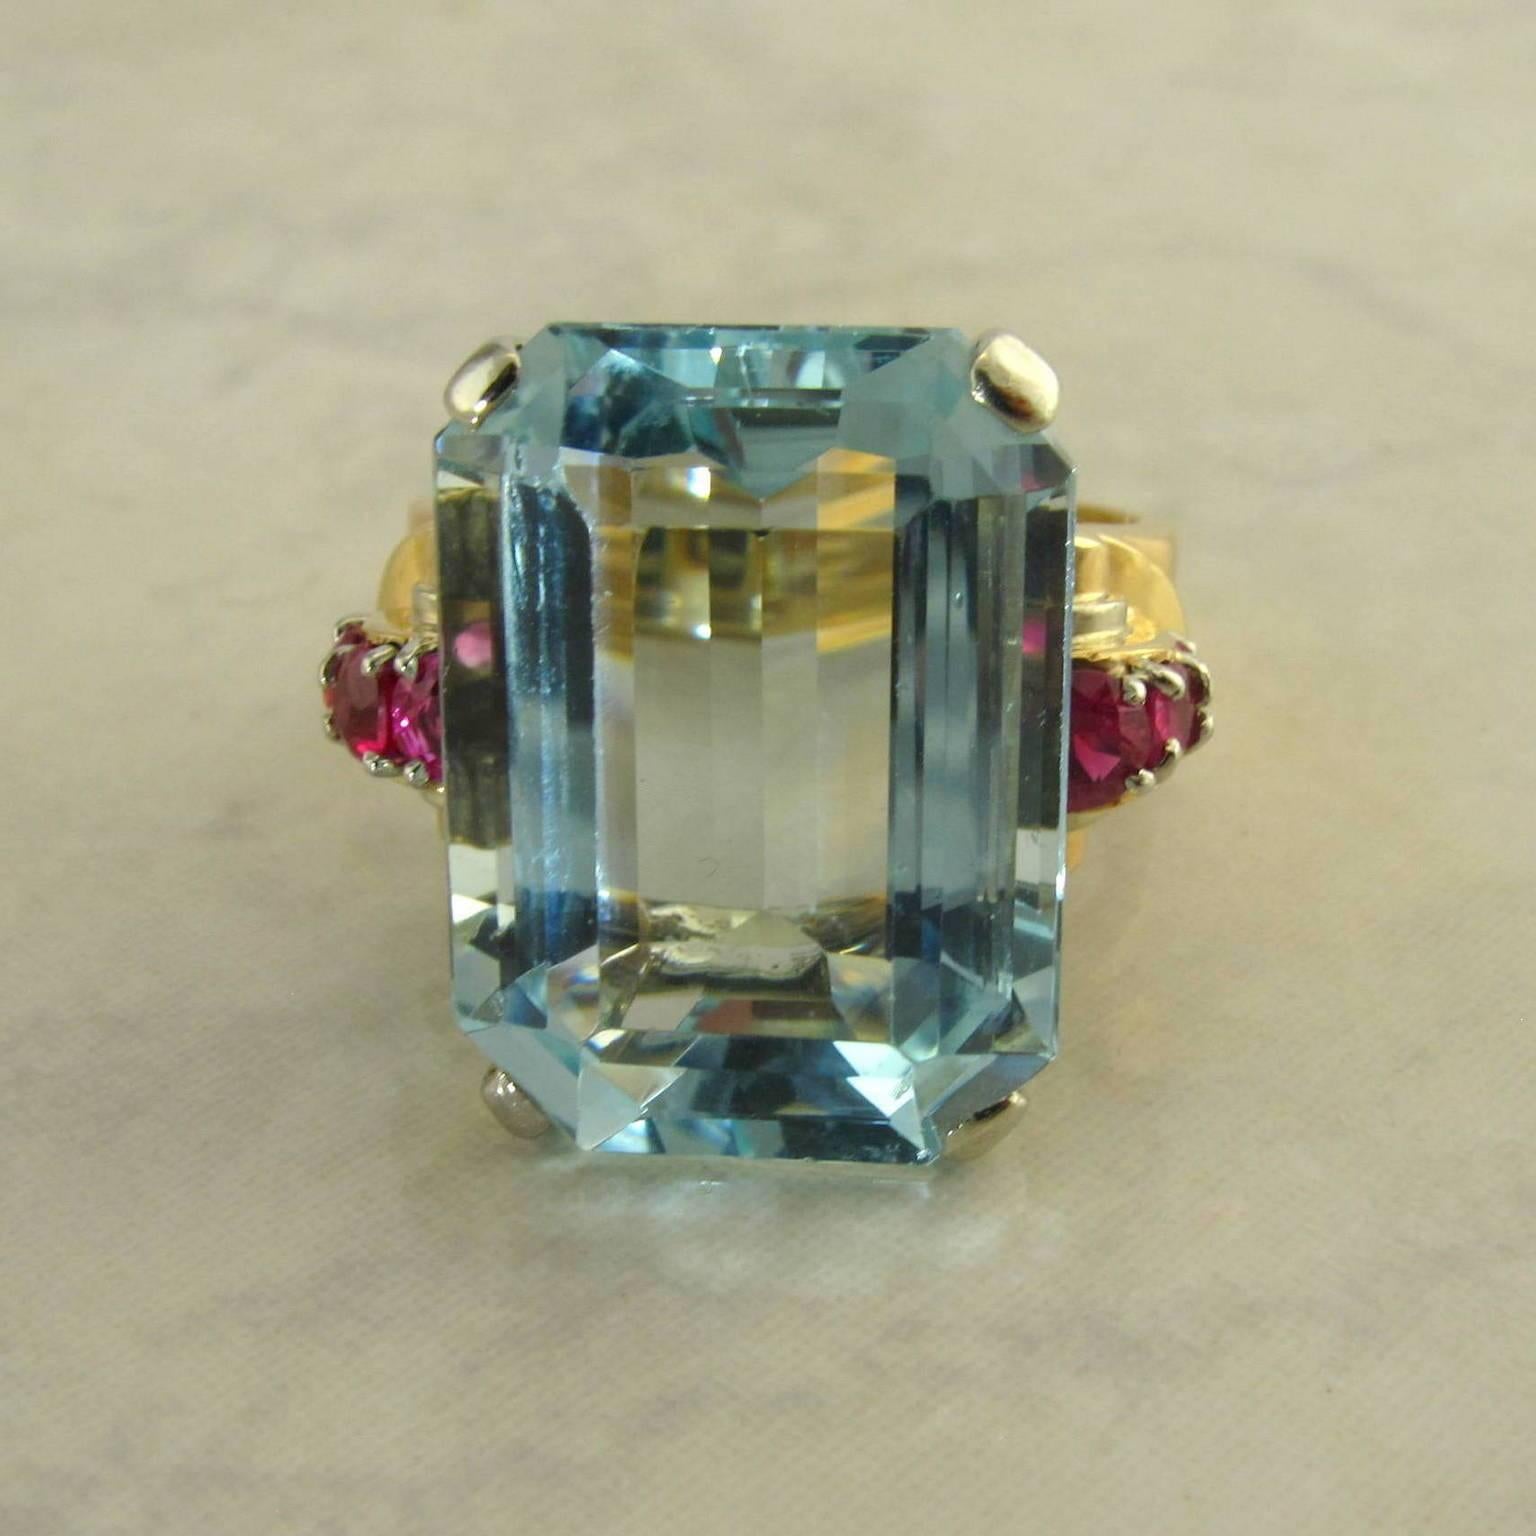 14 karat rose and white gold aquamarine and ruby Retro ring.
One center emerald cut aquamarine set in white gold weighing approximately 13.30 carats, accented with six round prong set synthetic rubies weighing approximately .60 carat total. The